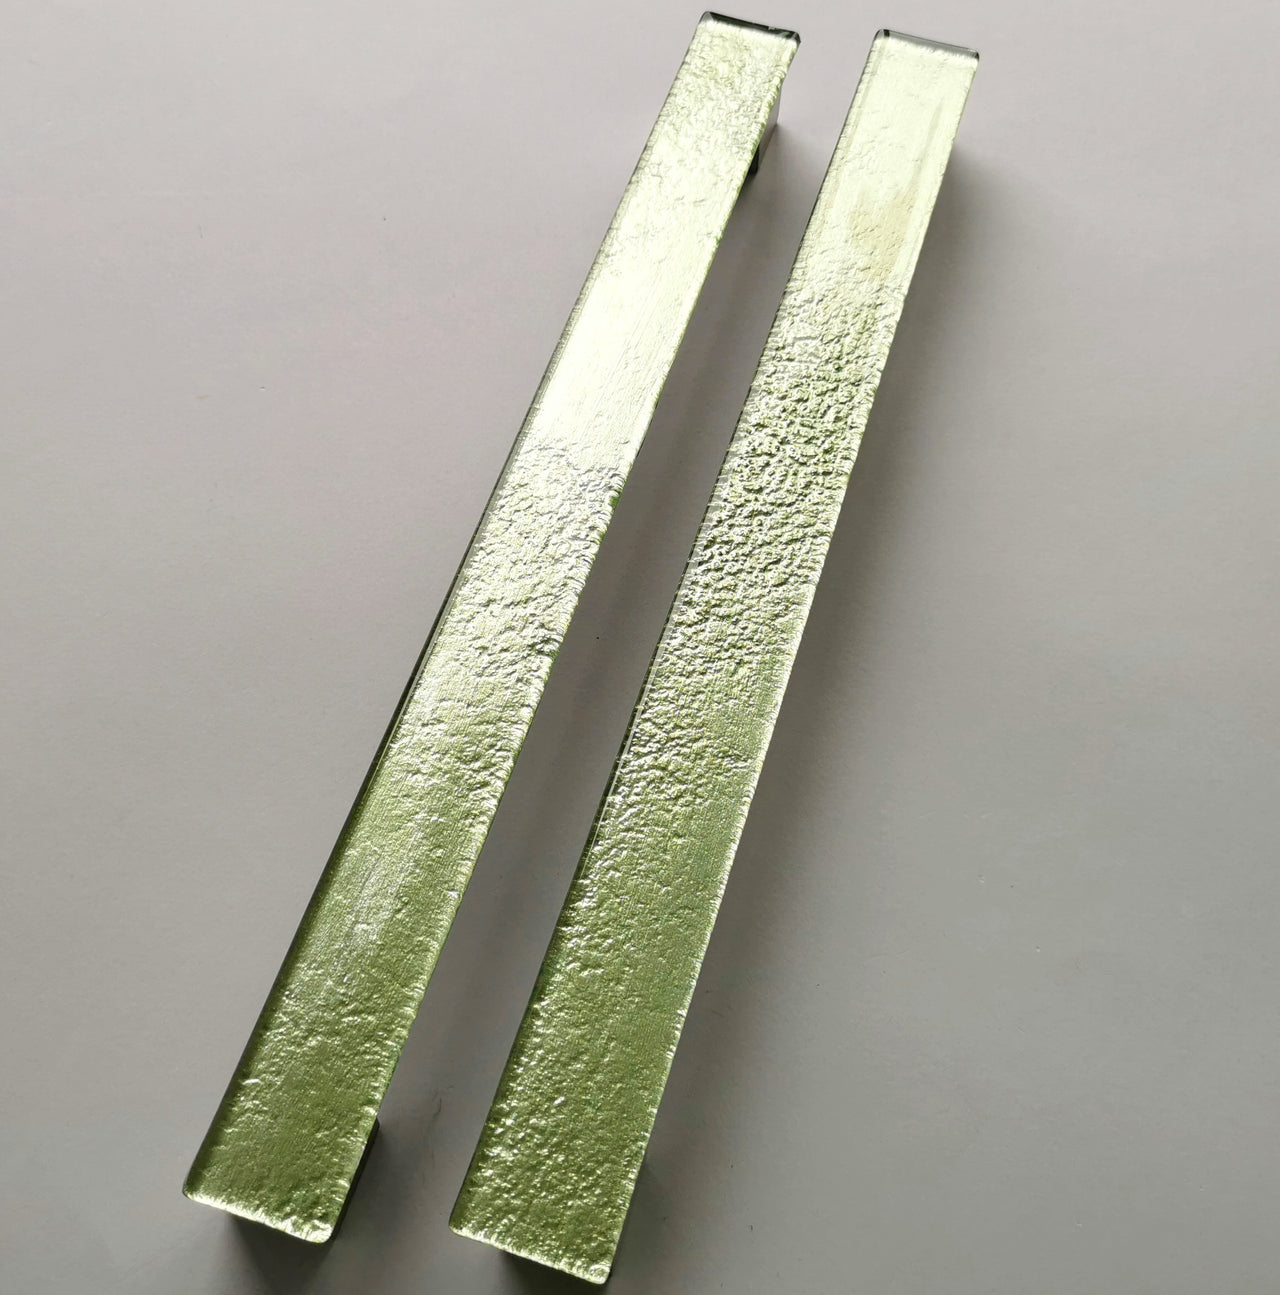 A Set of 2 Large Glass Pulls in Golden Green. Large Golden Green Fused Glass Handle - 0050